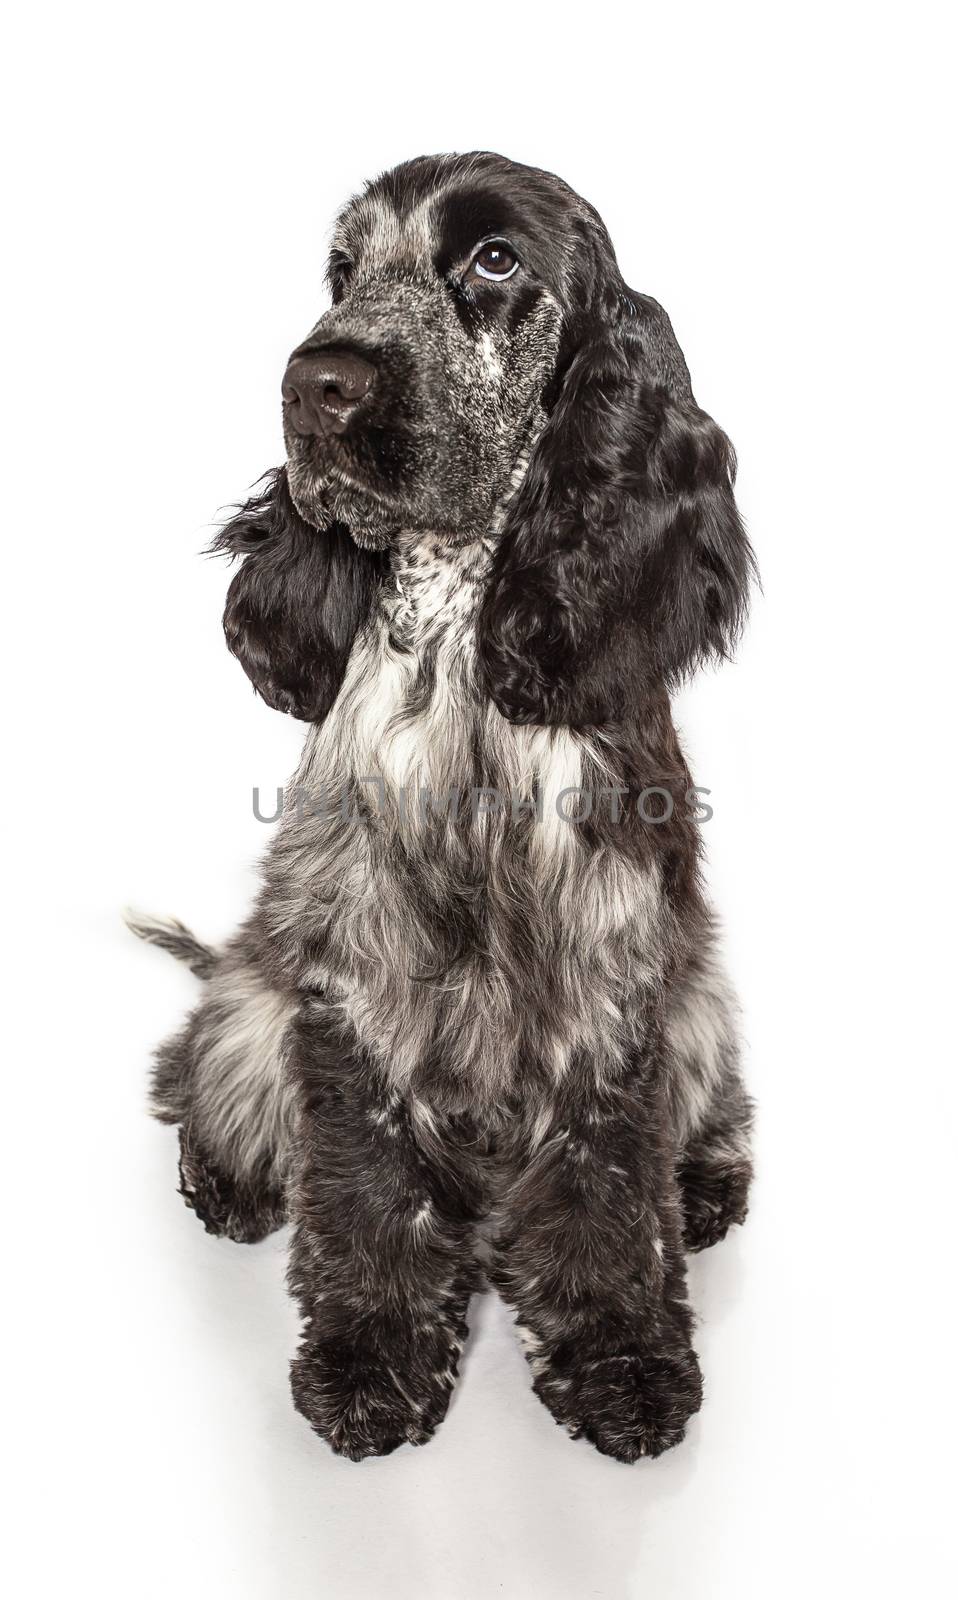 English cocker spaniel sitting down, isolated on a white background